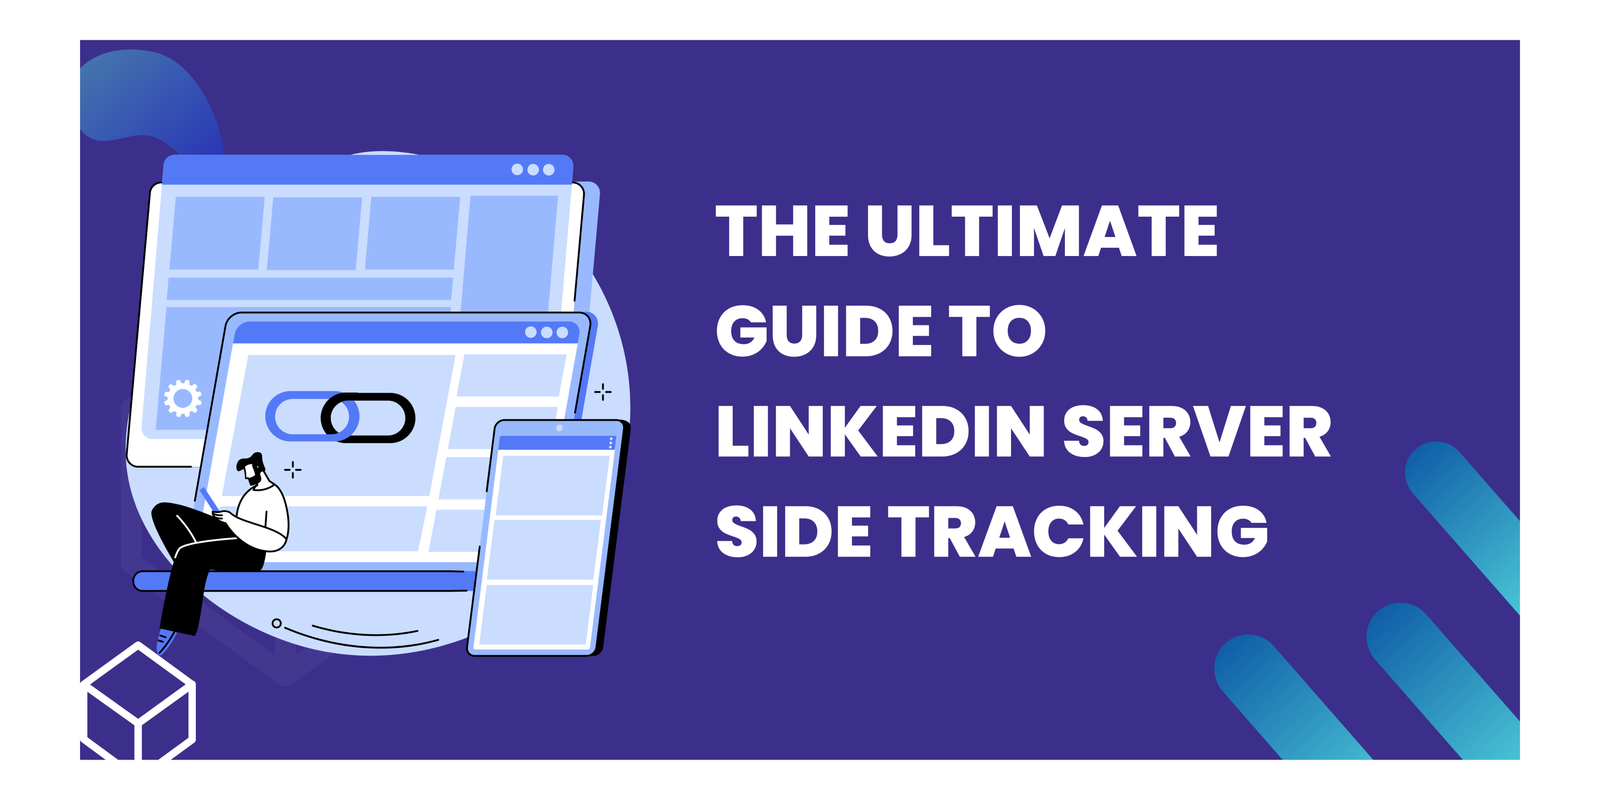 The Ultimate Guide to LinkedIn Server Side Tracking